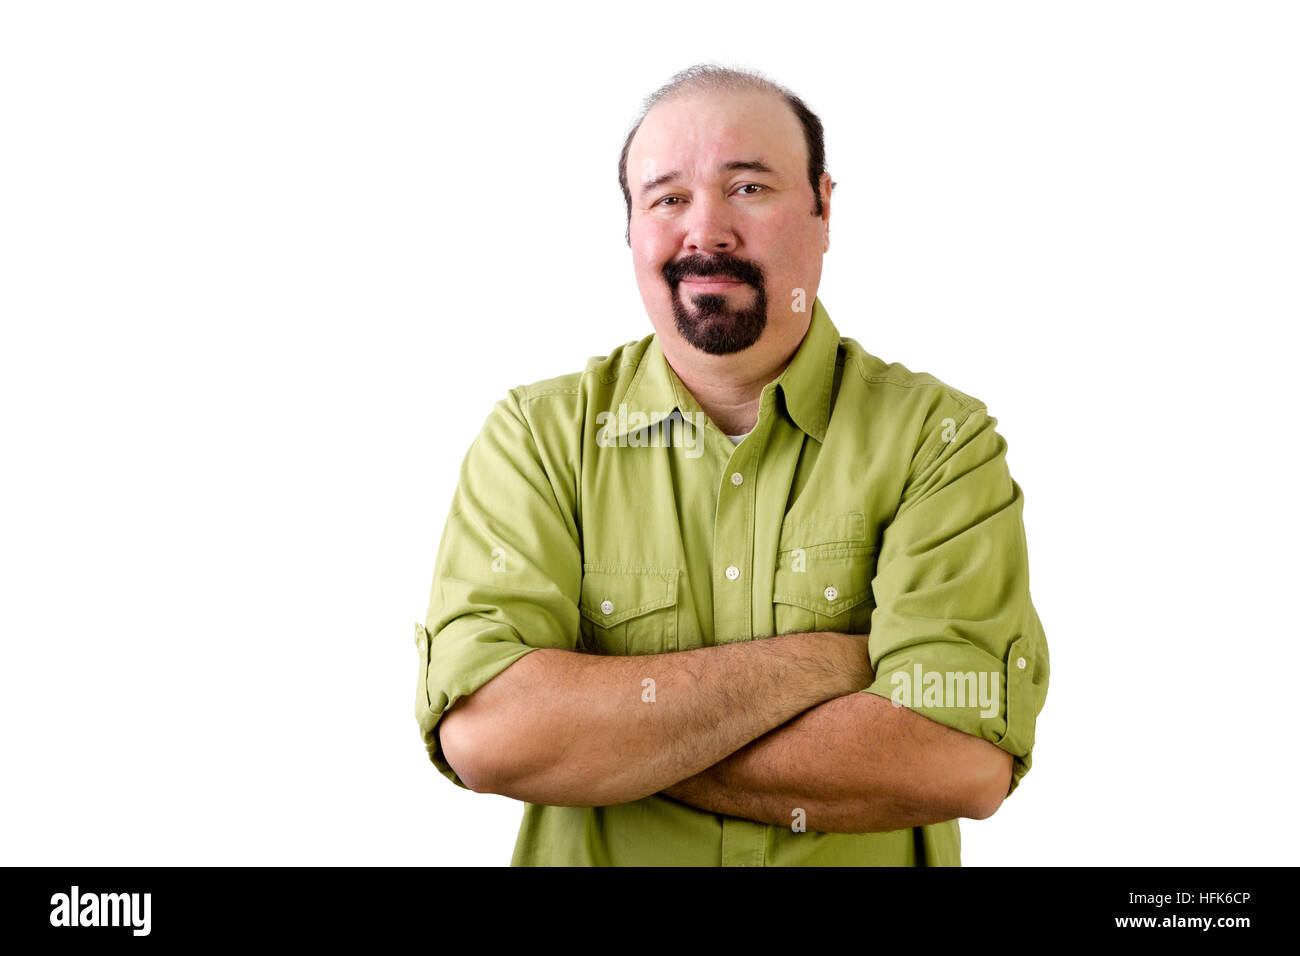 Grinning middle aged man with beard and folded arms on white Stock Photo